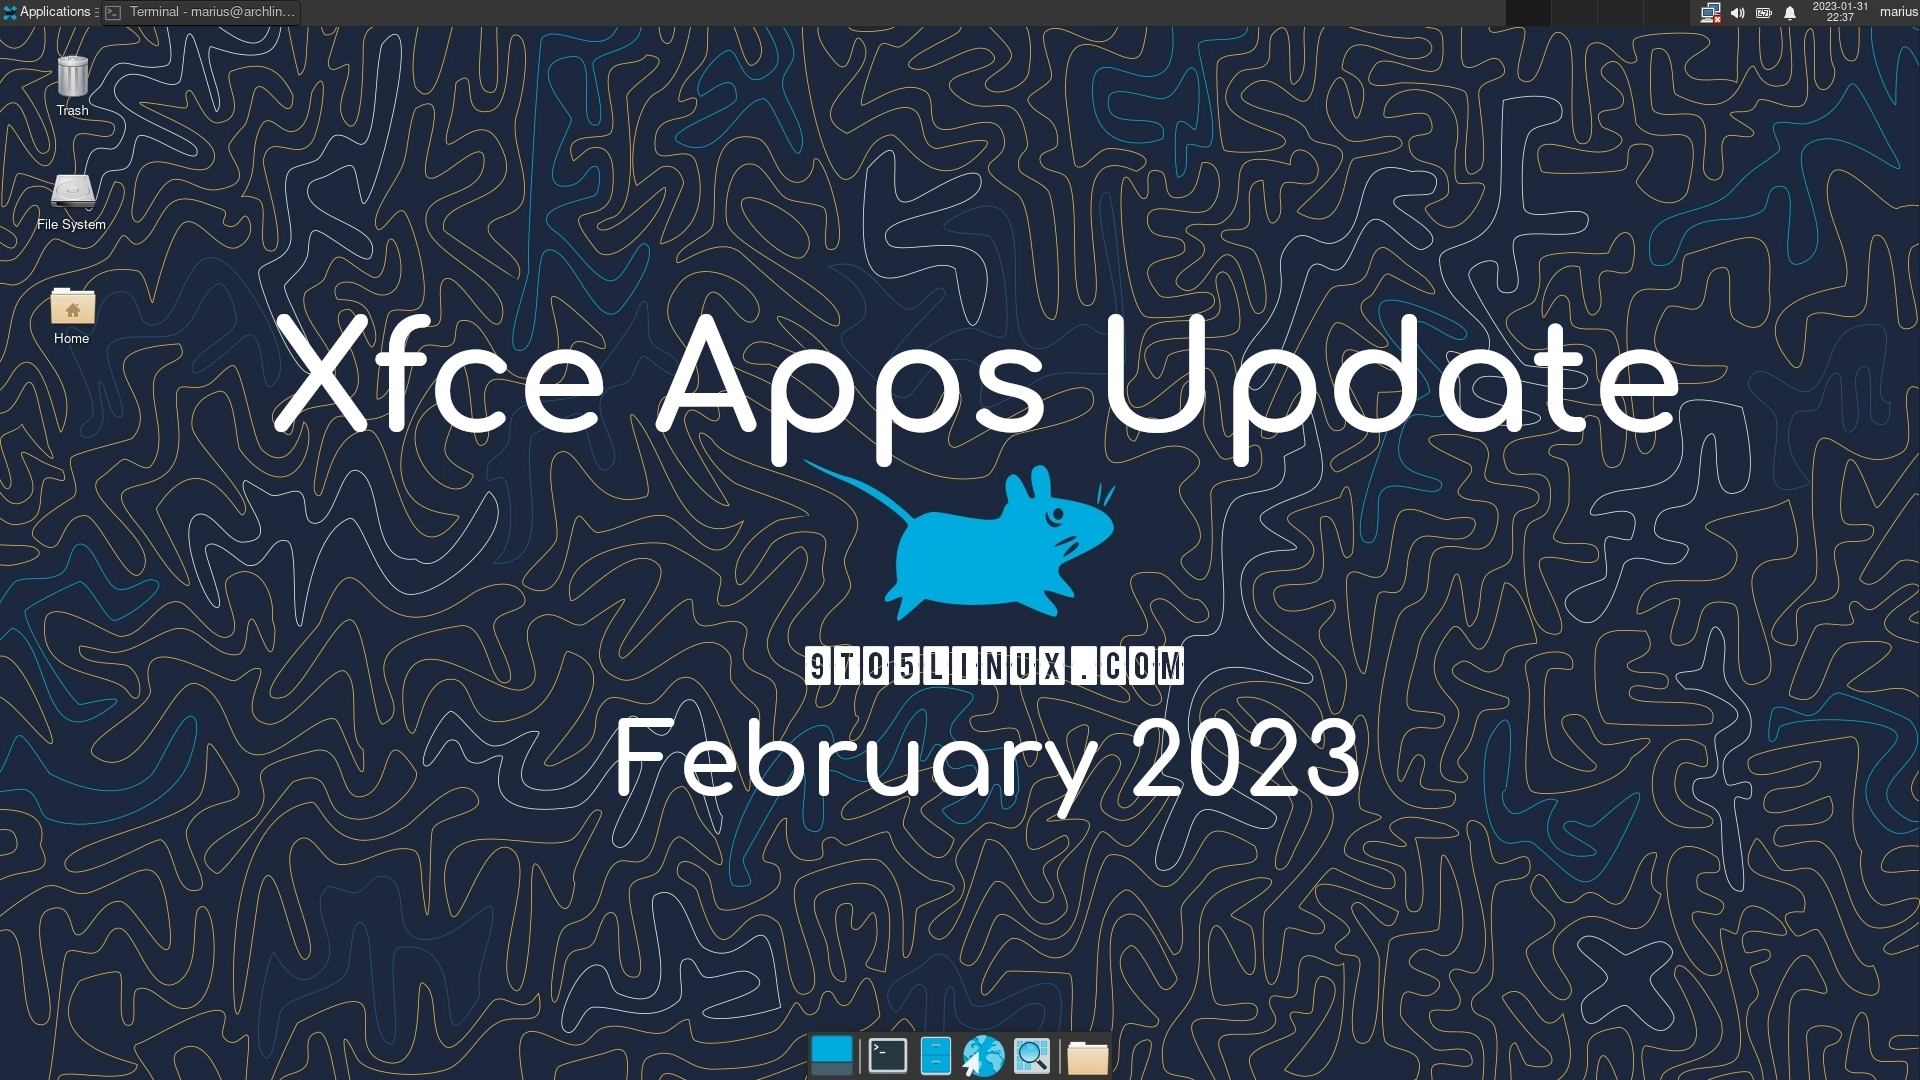 Xfce’s Apps Update for February 2023: Ristretto Gets Printing Support, Major Notifications Changes, and More